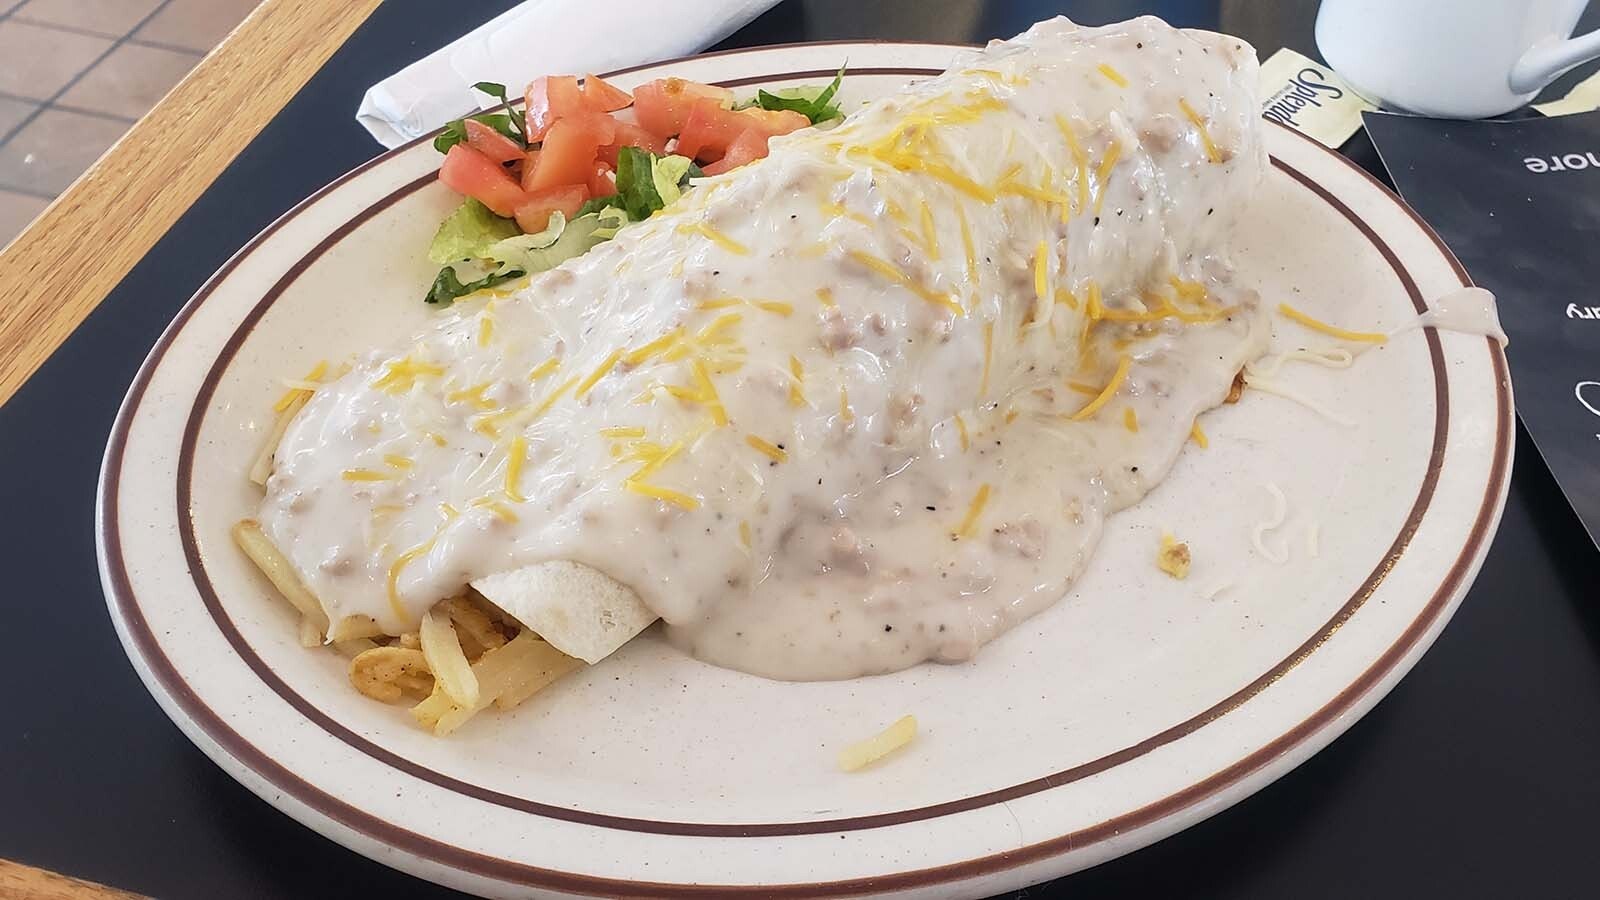 A breakfast burrito smothered in gravy makes for a hearty meal.